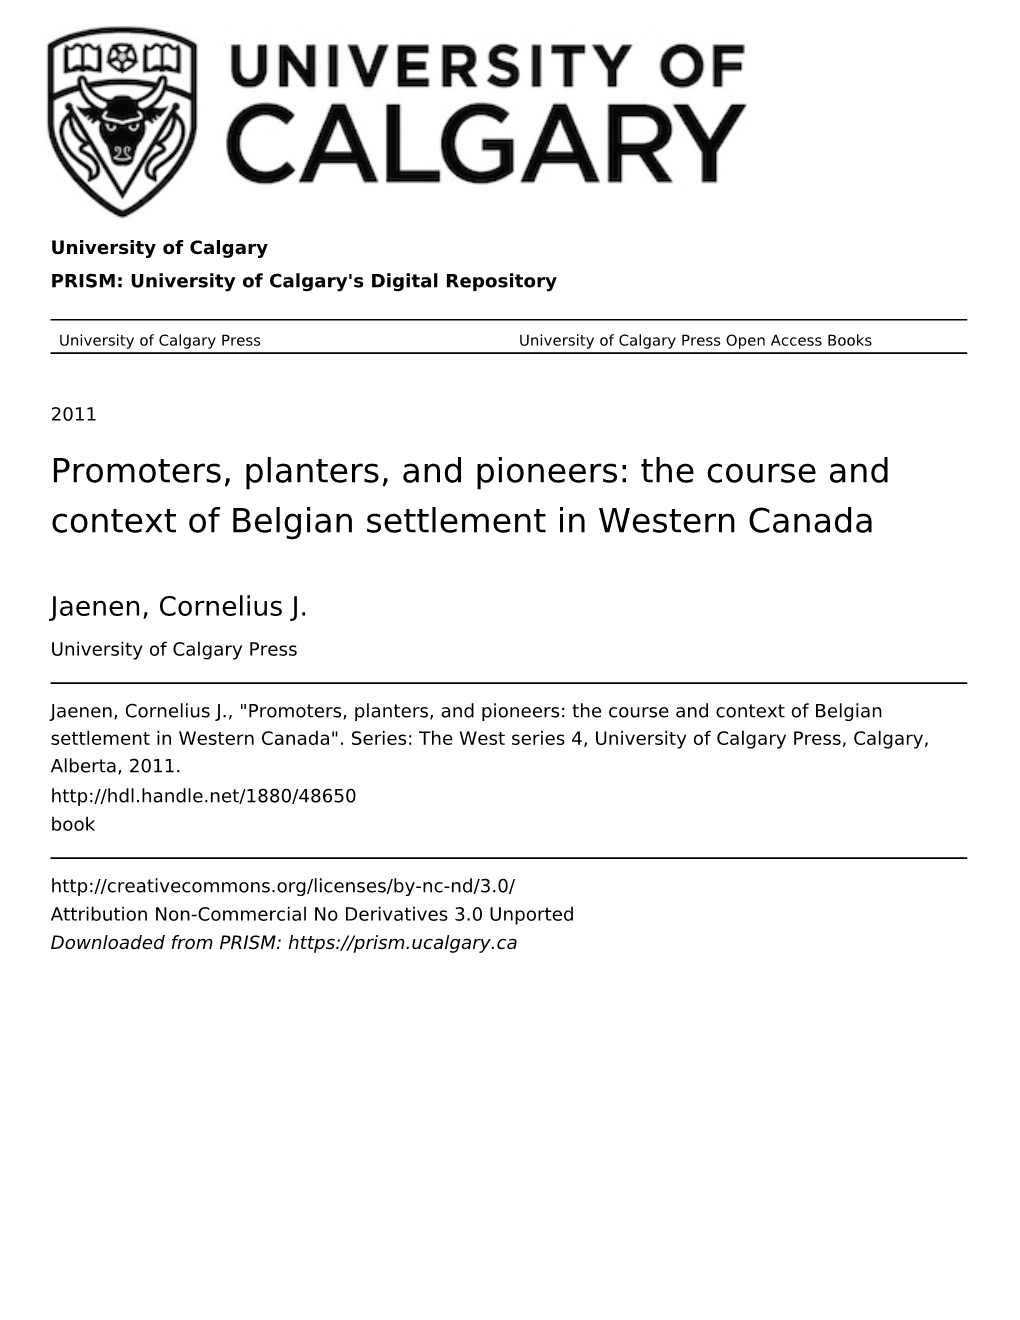 Promoters, Planters, and Pioneers: the Course and Context of Belgian Settlement in Western Canada